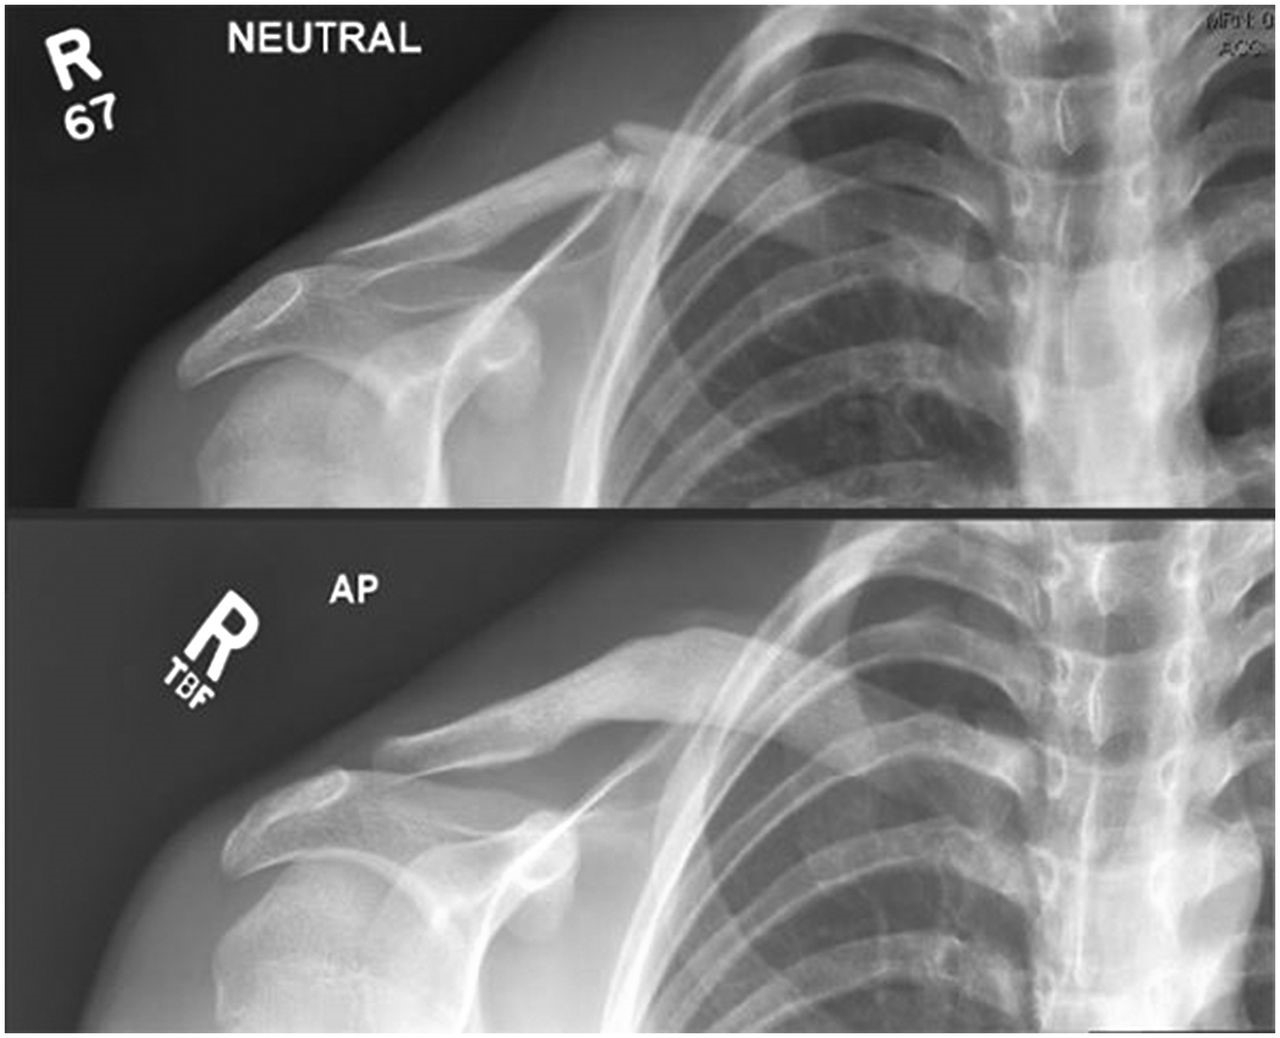 Clavicle fractures